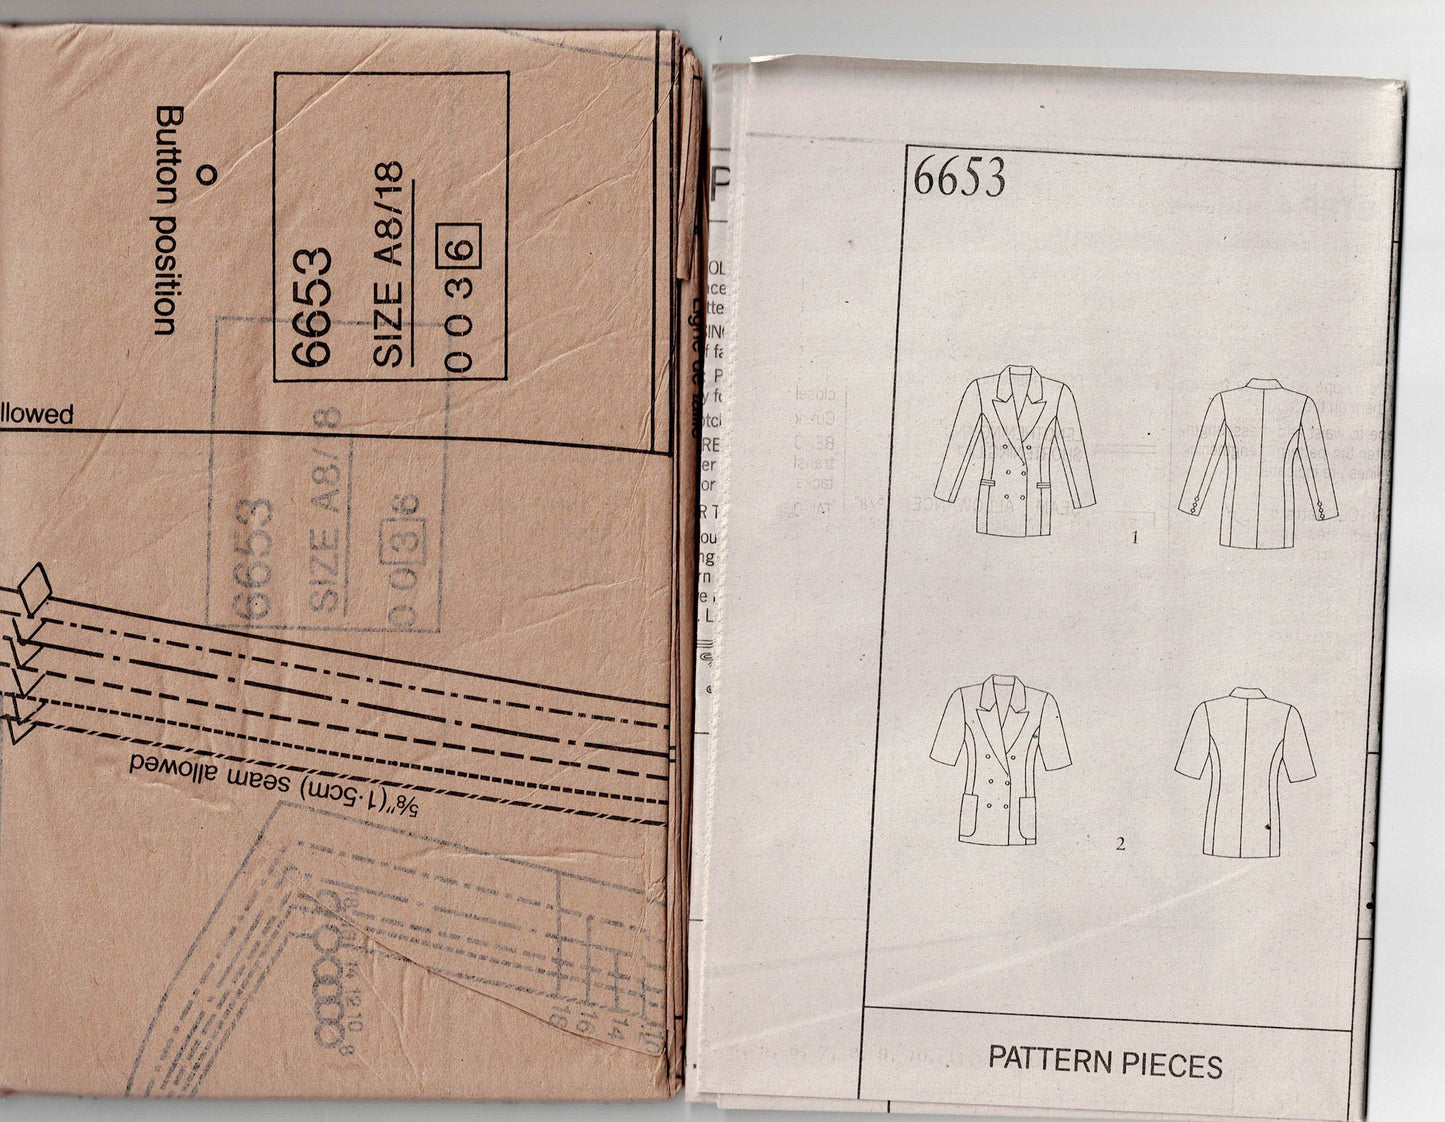 New Look 6653 Womens Double Breasted Lined Jacket 1980s Vintage Sewing Pattern Sizes 8 - 18 UNCUT Factory Folded